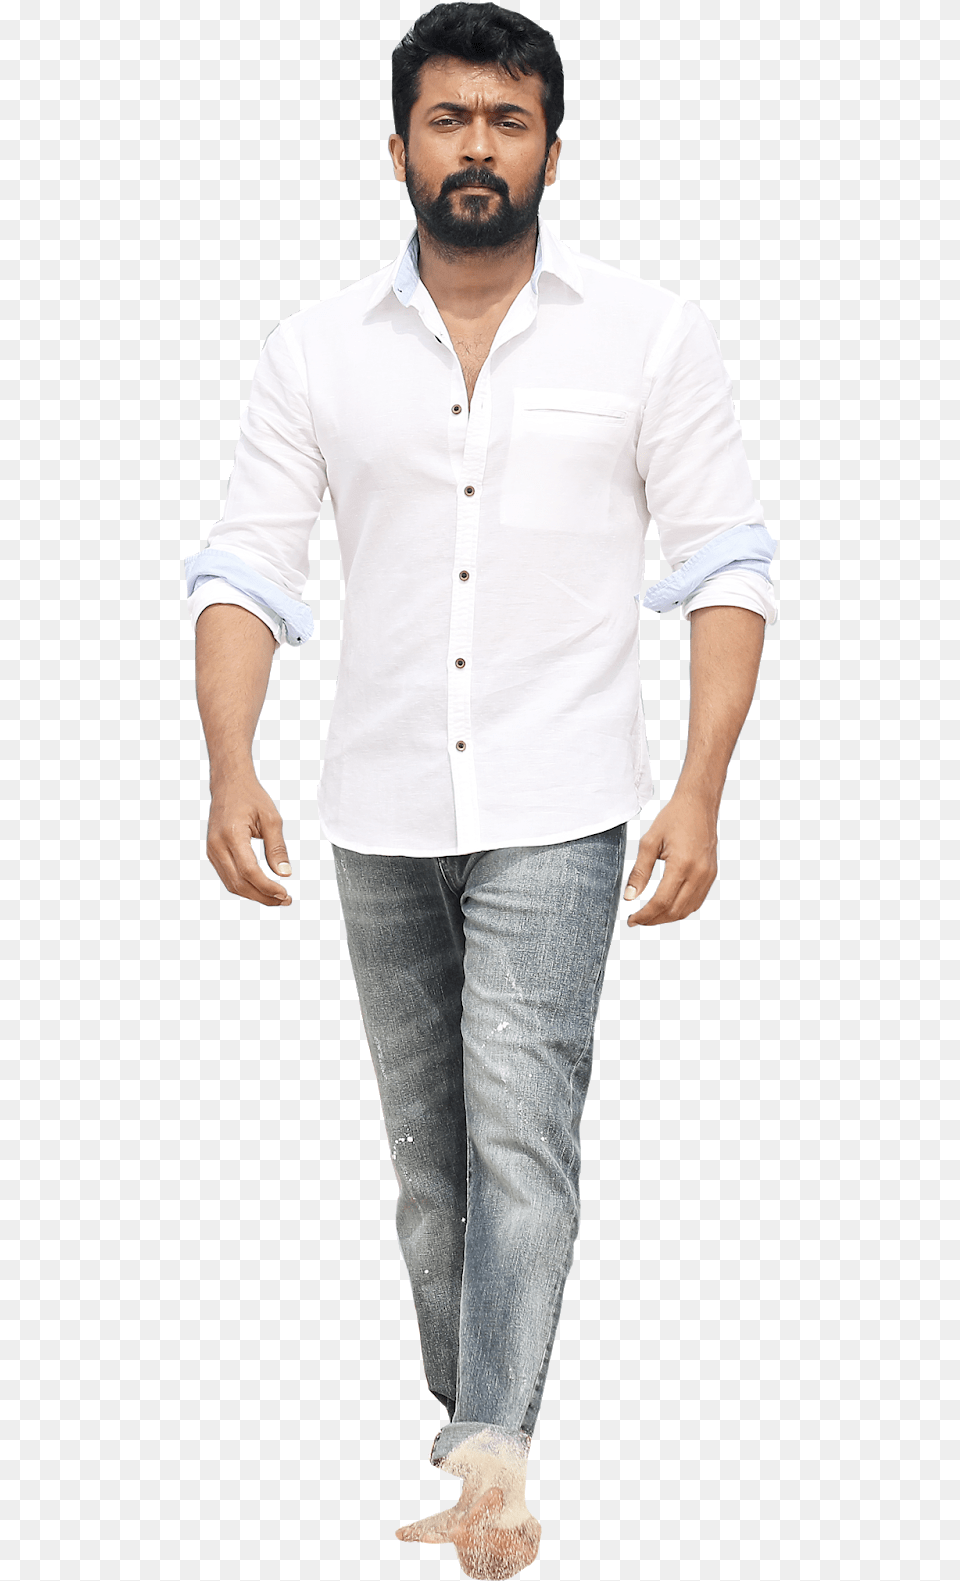 Surya Ngk Ultra Hd Stickers And Ngk Surya Images Hd, Standing, Clothing, Shirt, Person Free Png Download